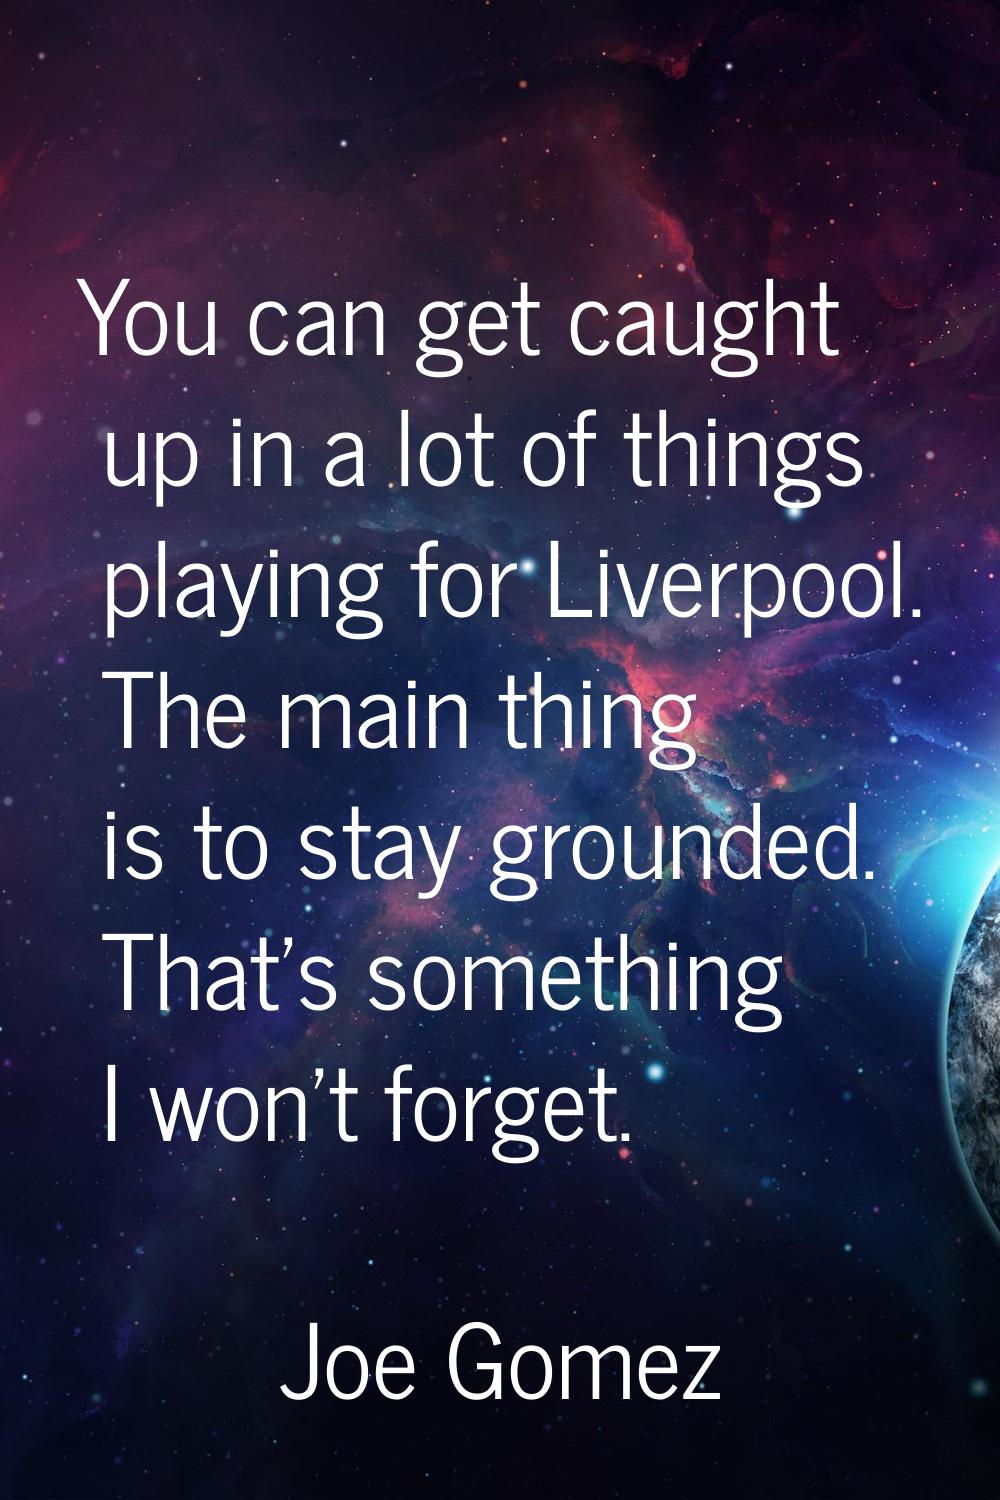 You can get caught up in a lot of things playing for Liverpool. The main thing is to stay grounded.